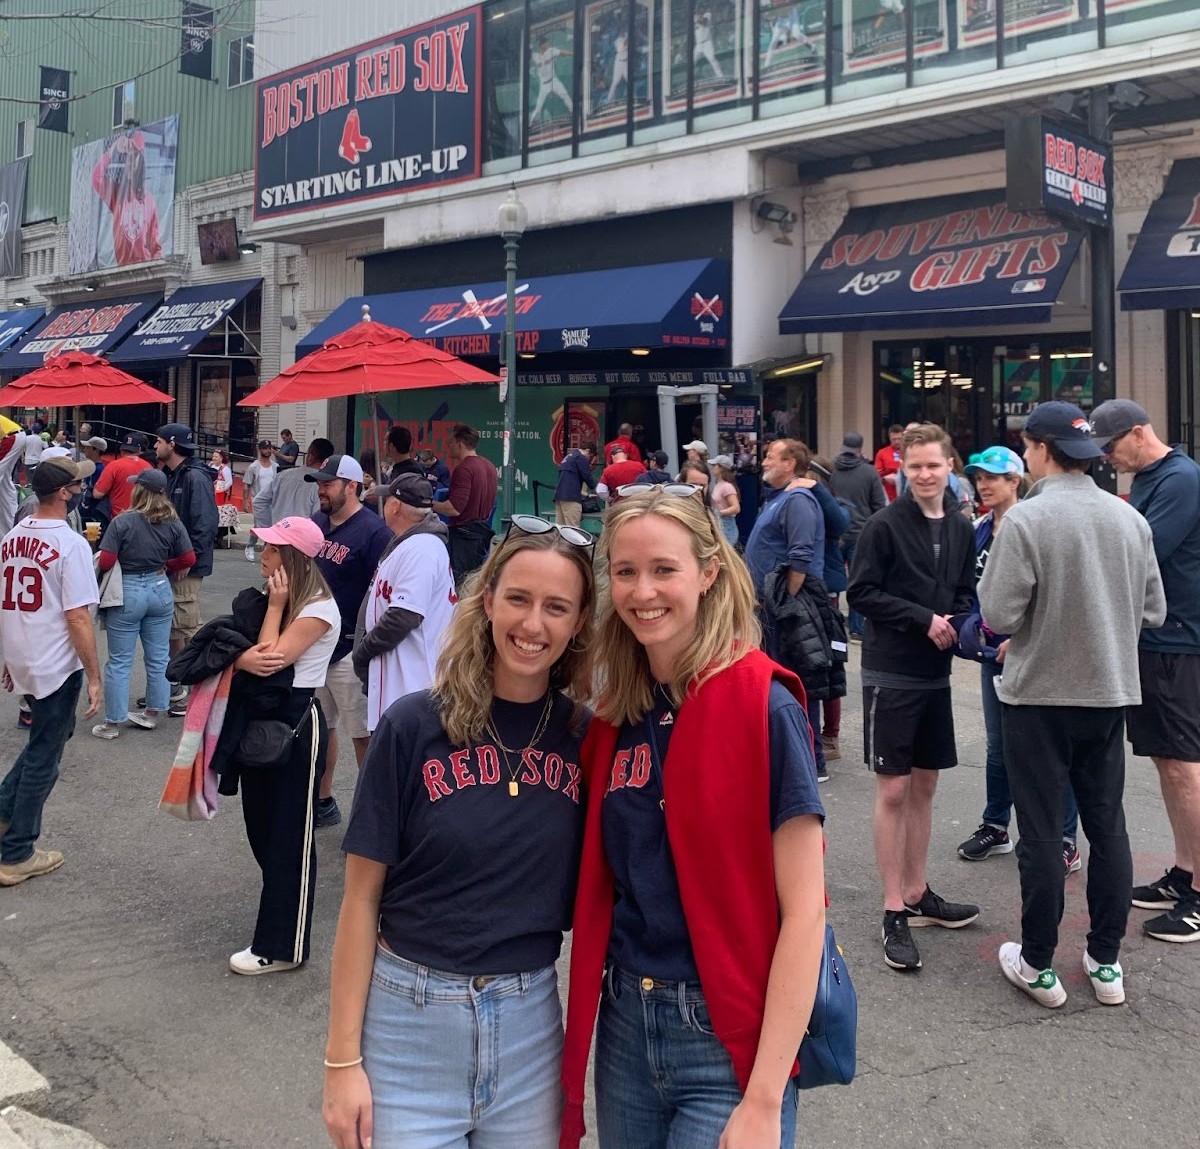 Jacqueline at a Red Sox game